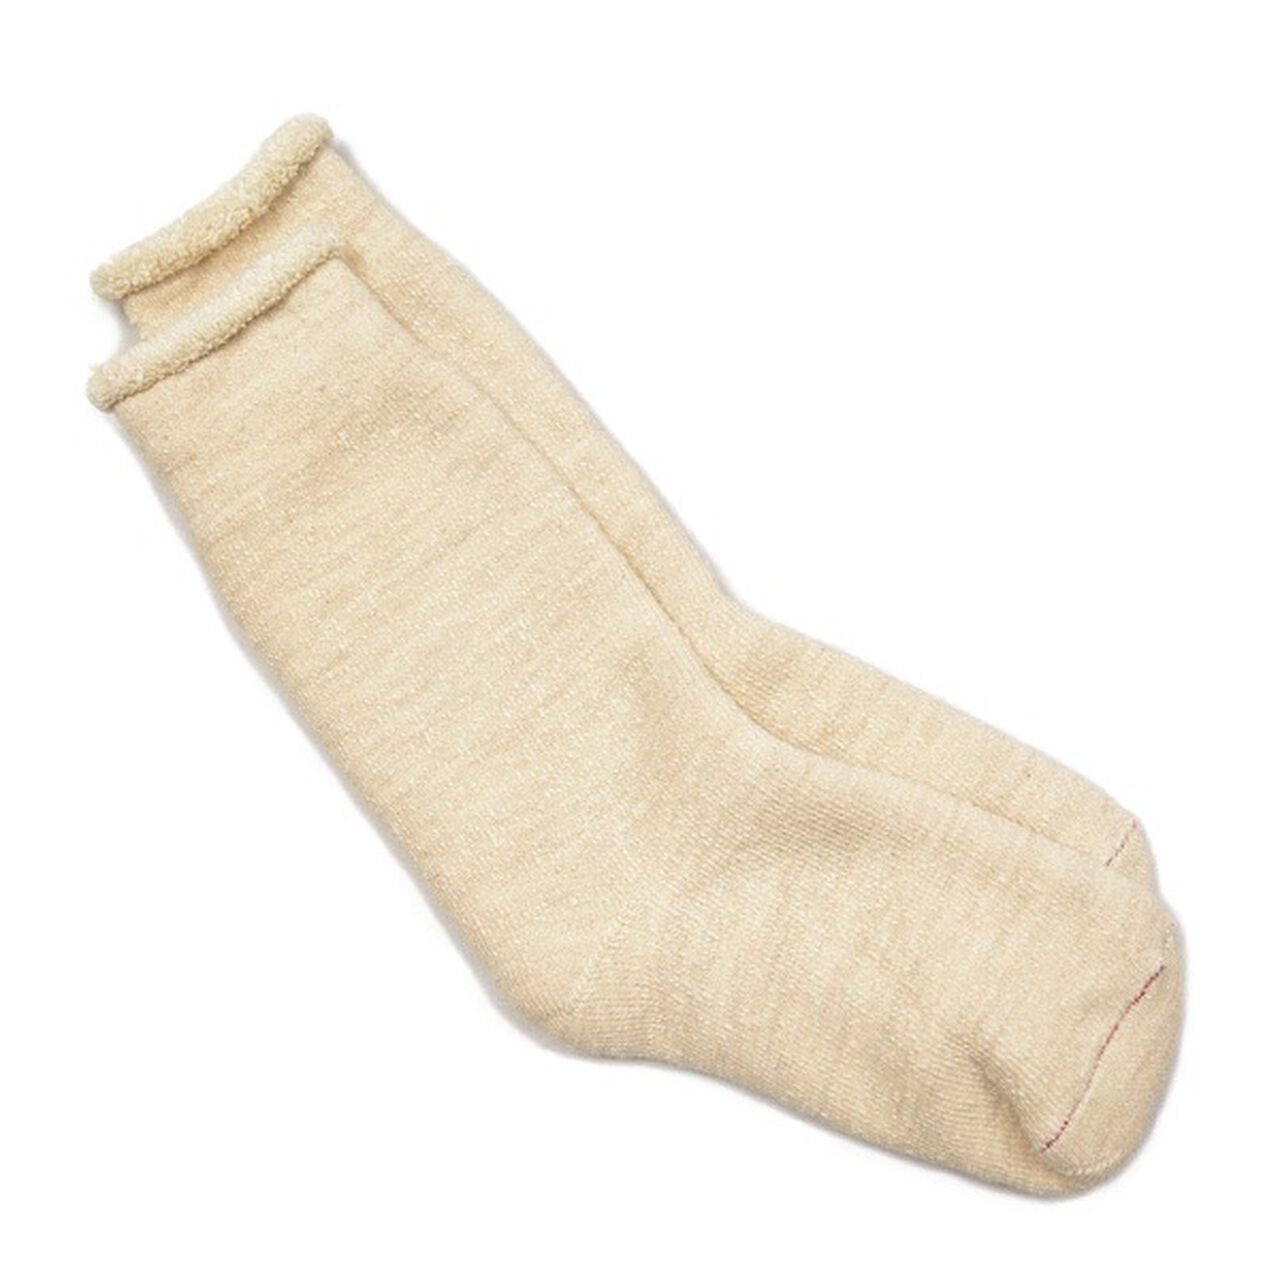 R1001 Double Face Socks,Oatmeal, large image number 0